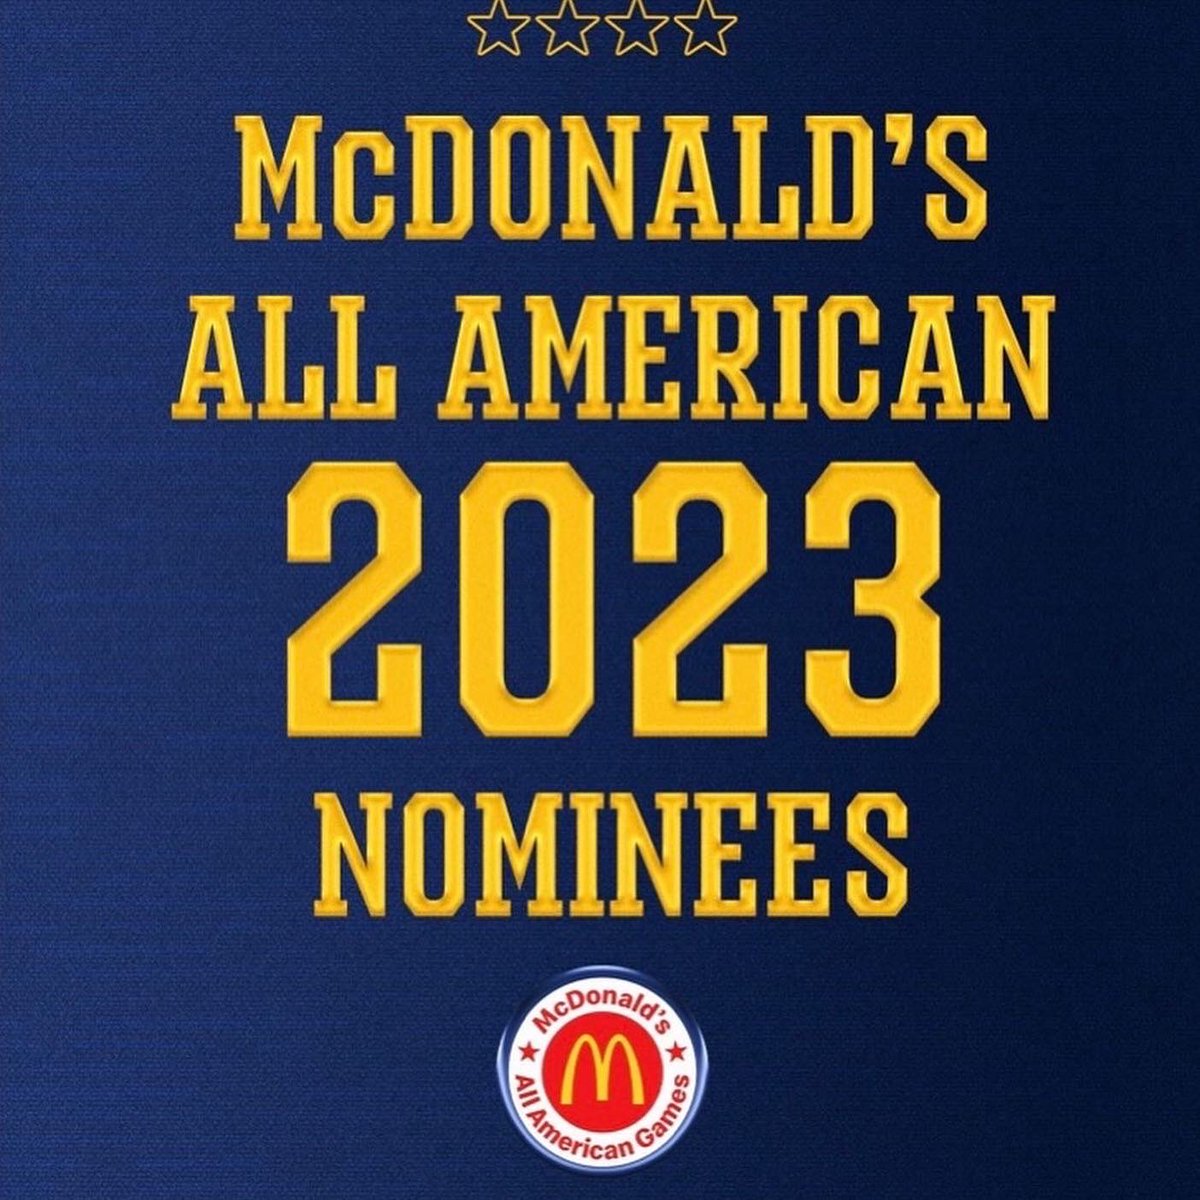 Another Big Congrats to yet another one of Florida Get Downs top players Blaise New @_blaisen chosen as McDonalds All American nominee! Representing Iona Prep & New Rochelle, New York! We honor & celebrate you! Well deserving of the recognition! Wishing U all the best! Dan